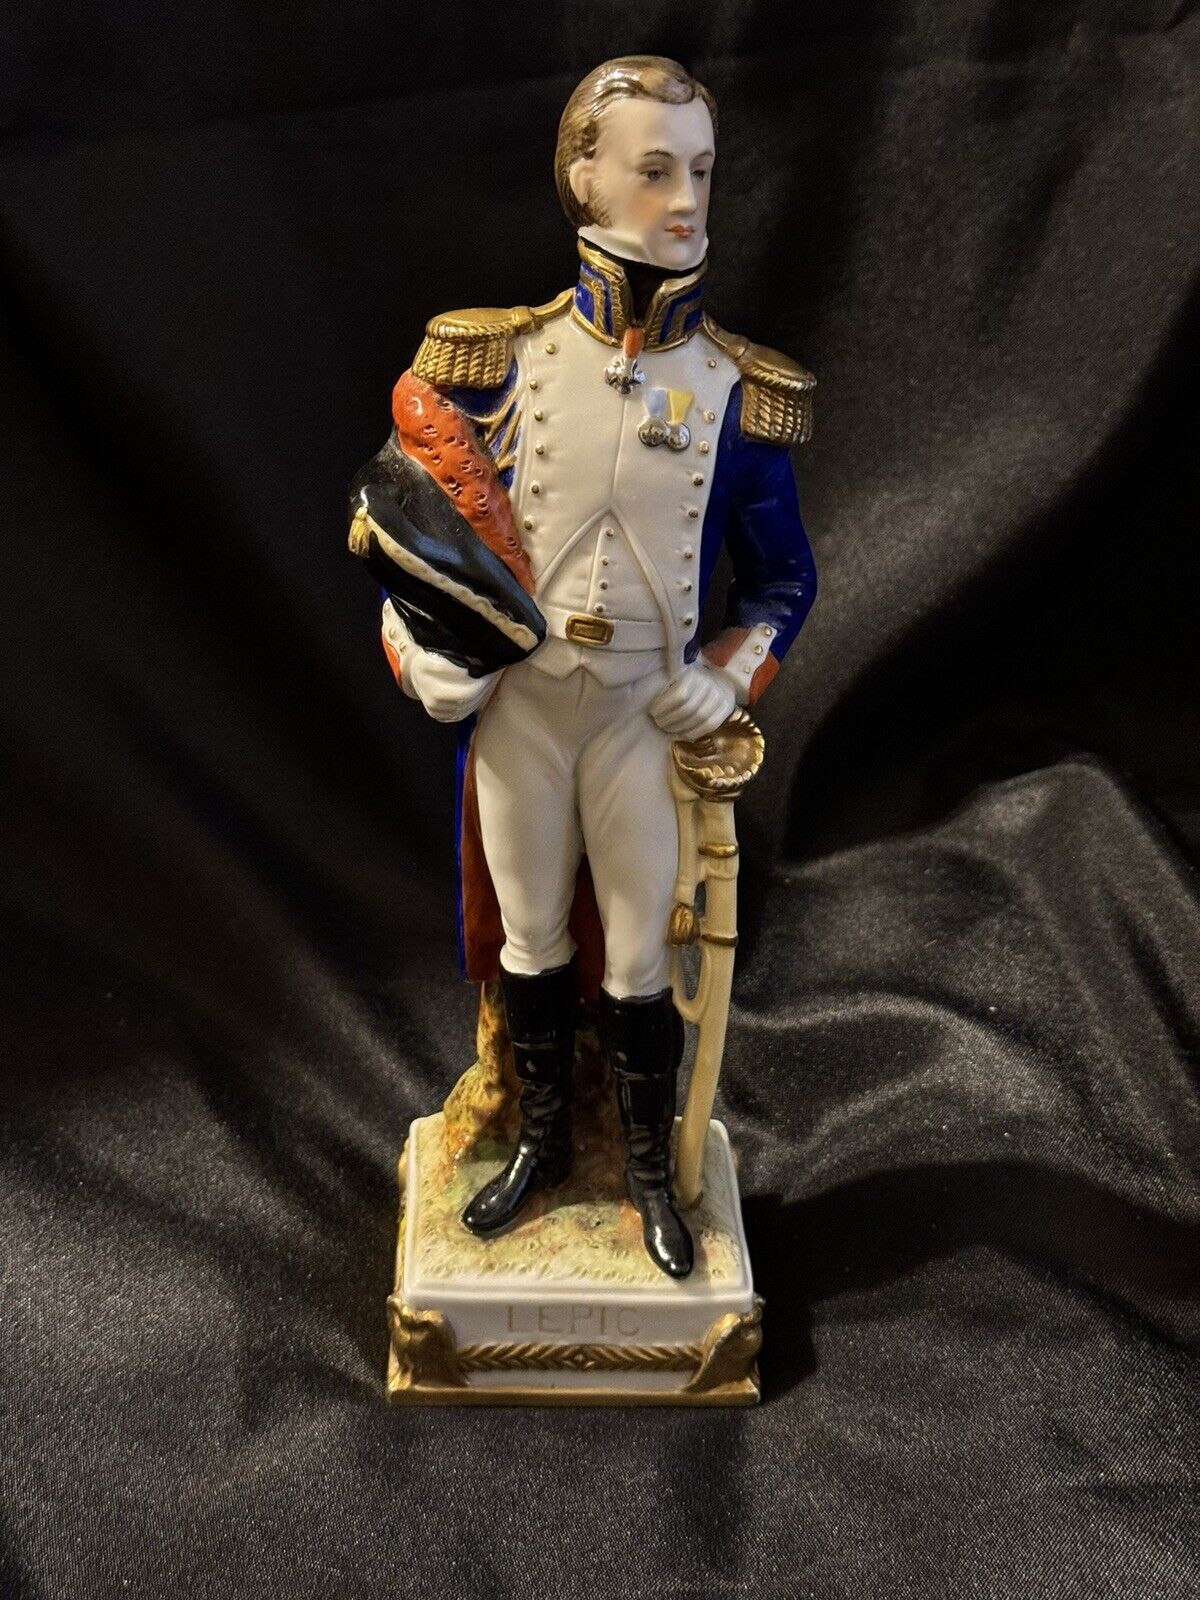 Scheibe alsbach german marked porcelain napoleon general LEPIC